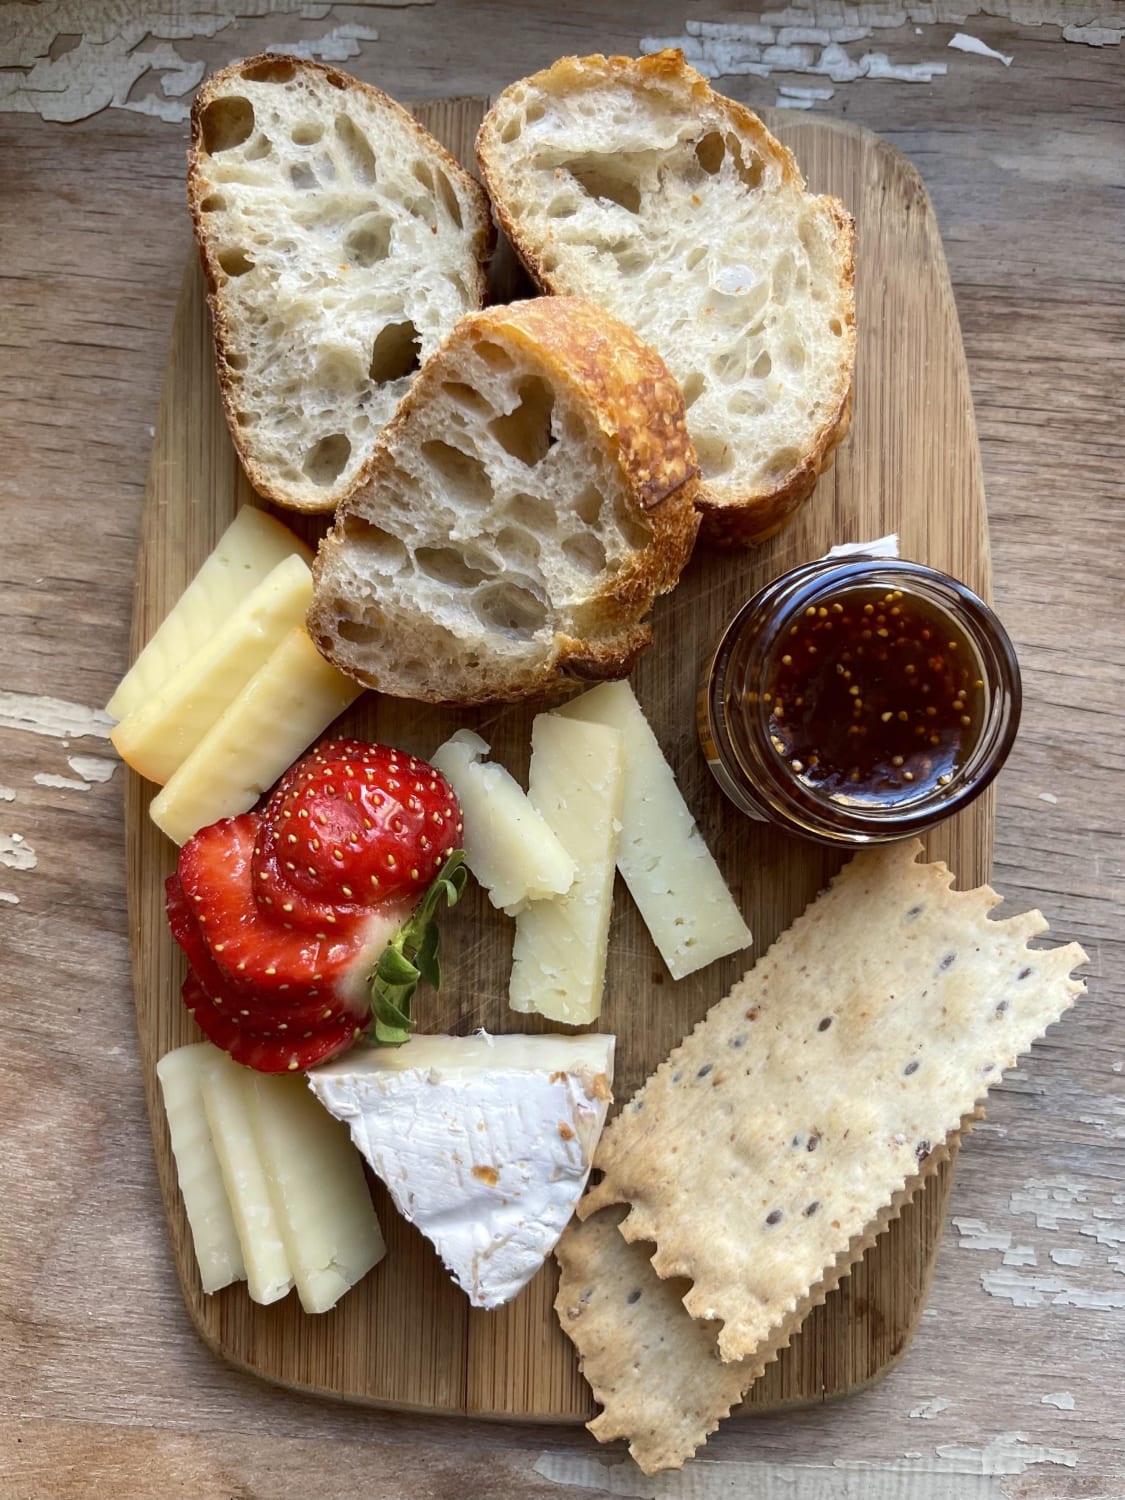 Recently dumped, so for lunch I made a cheese board for one 🥰 more cheese for me is quite the silver lining